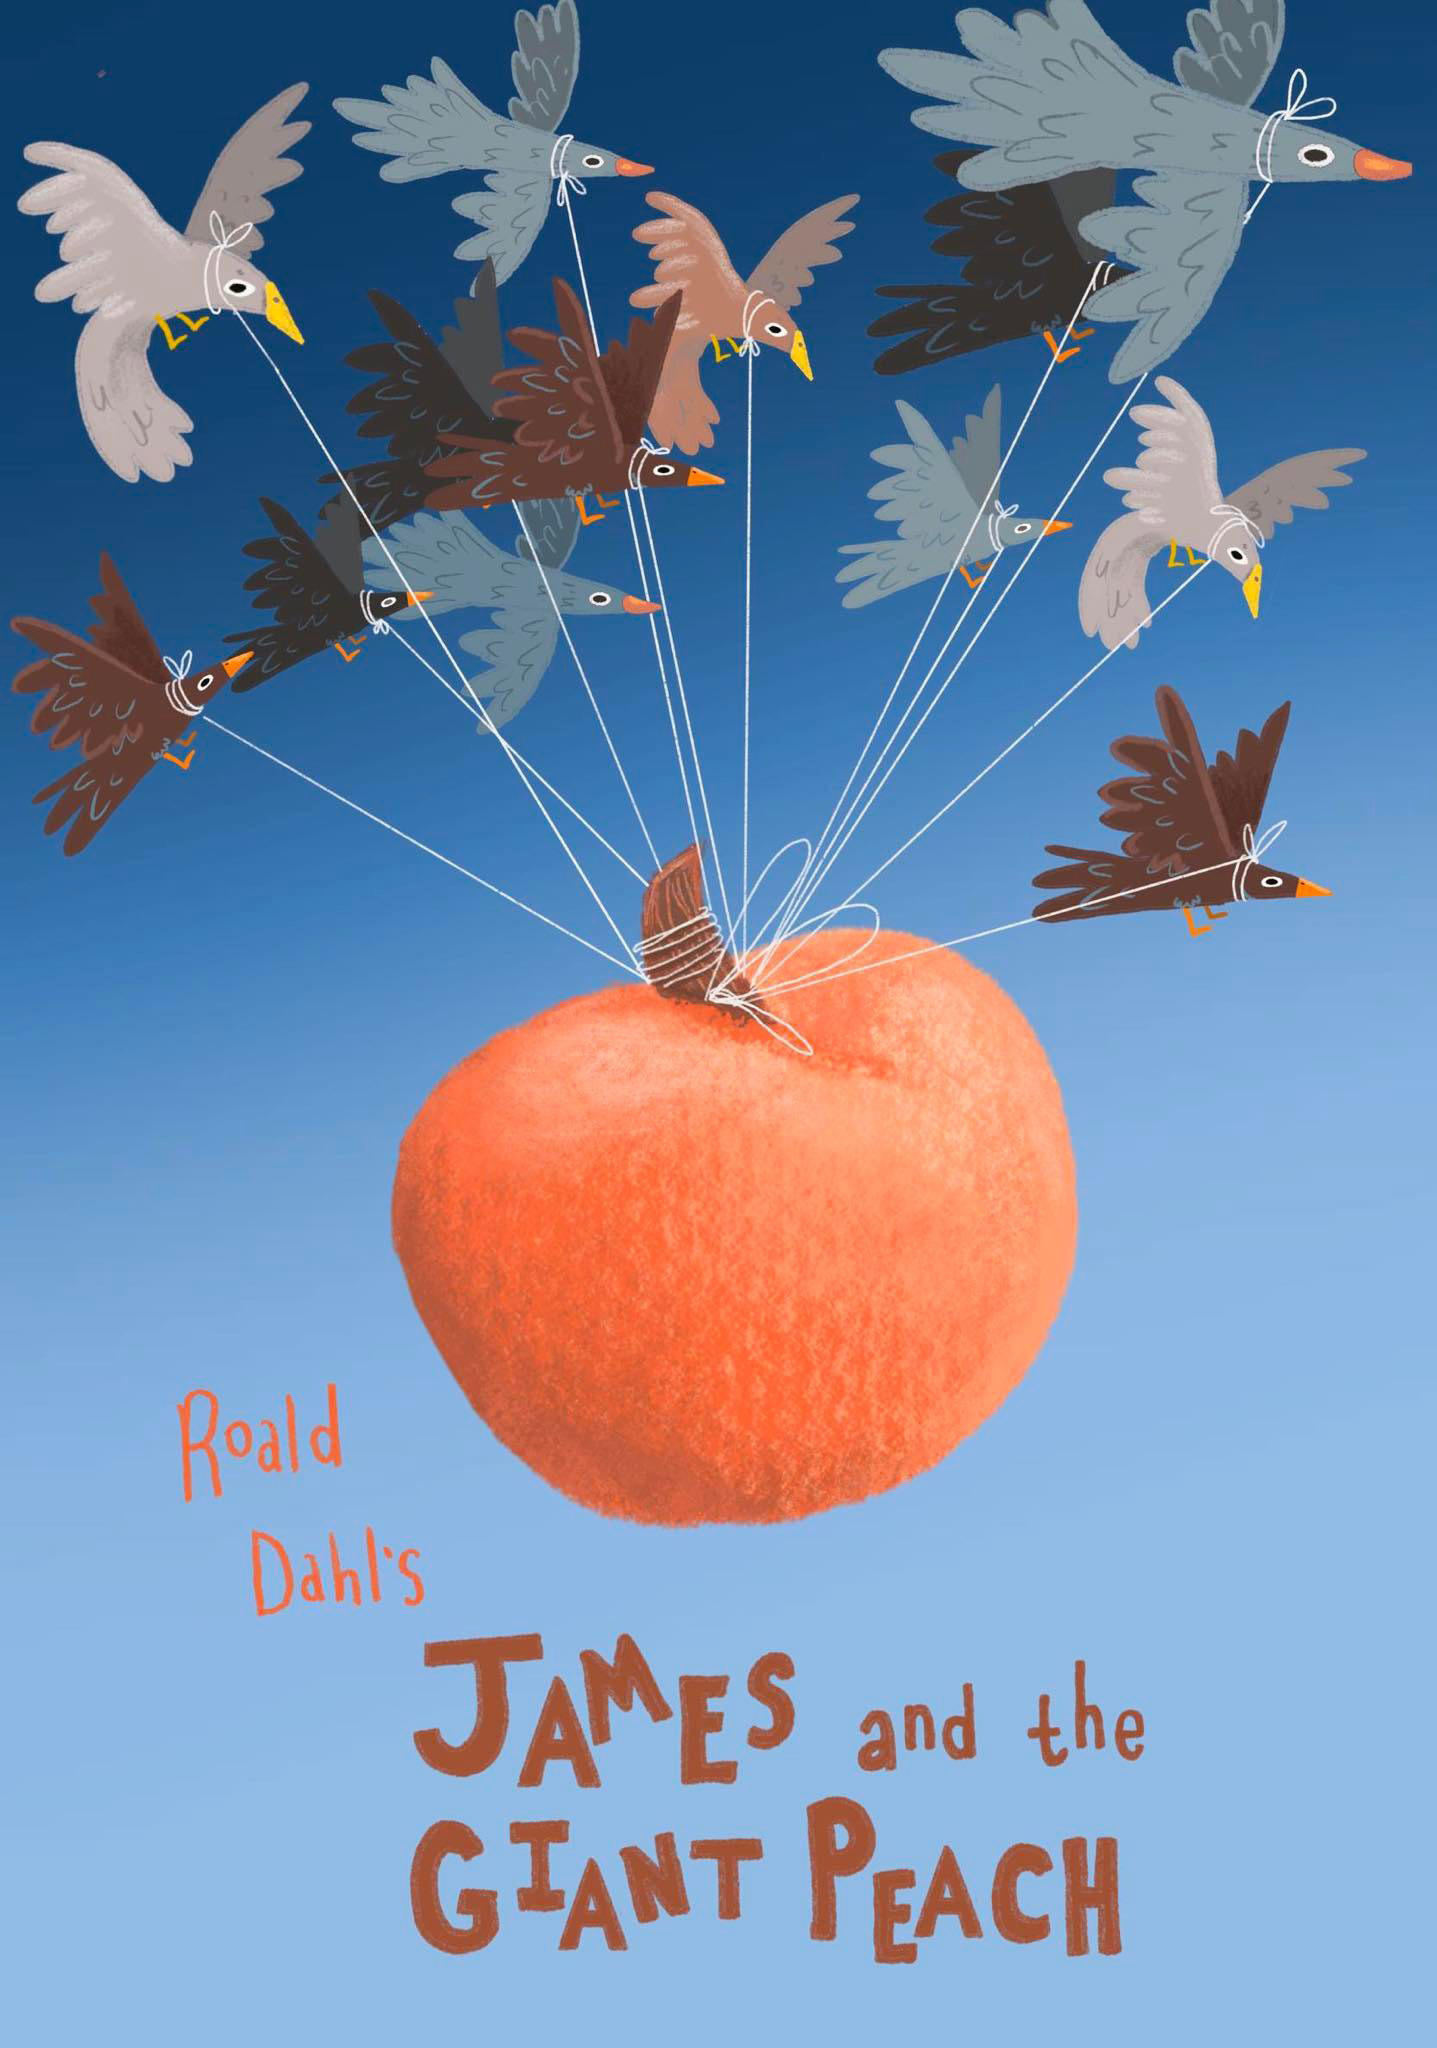 Children's book front cover design by Maddison Dunn for a children's classic Roald Dahl's 'James and the Giant Peach'. Showing a peach being carried by birds.